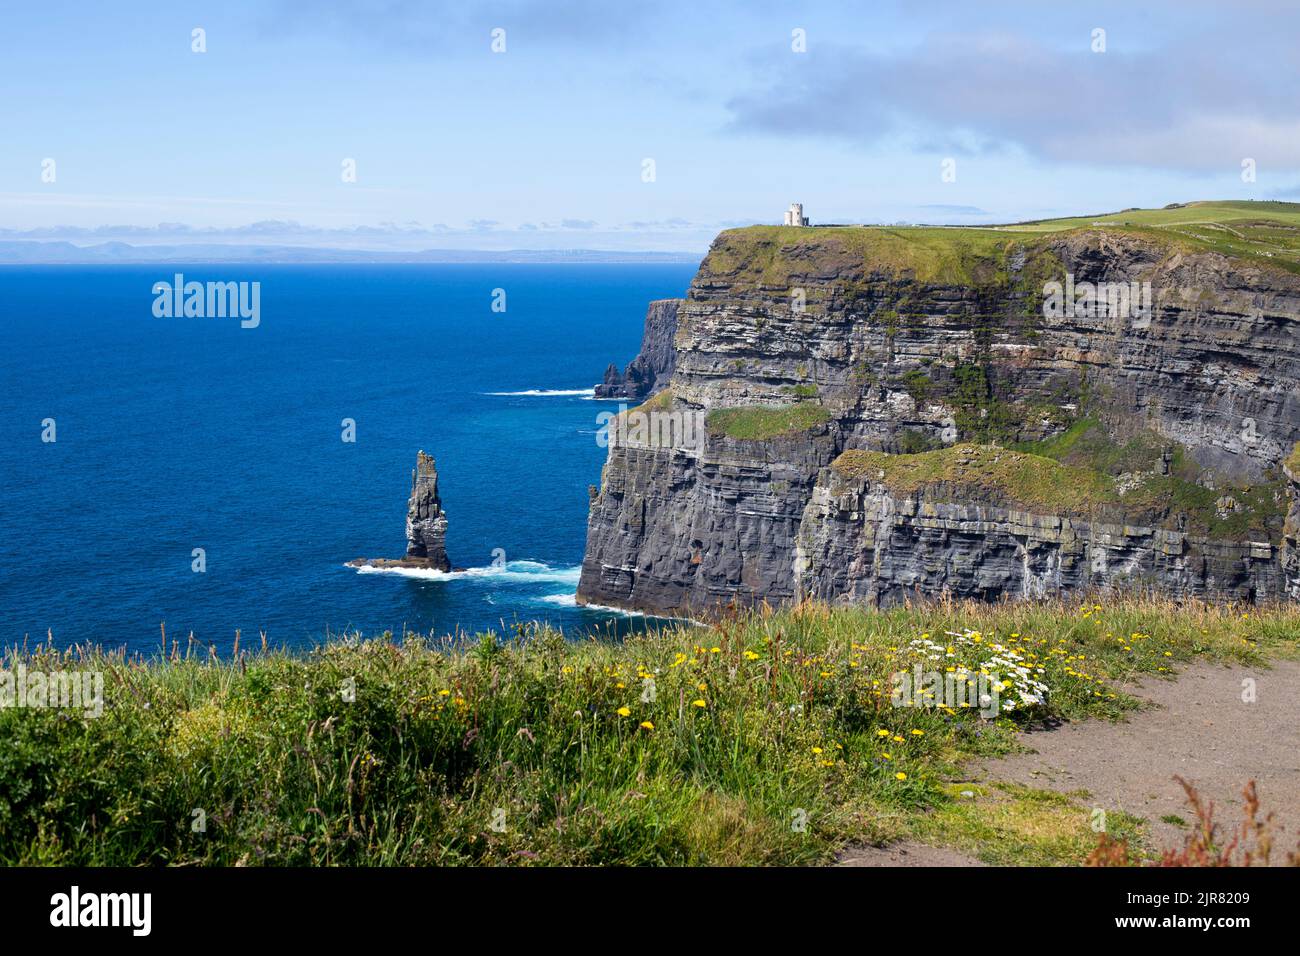 Cliffs of Moher with Branaunmore sea stack, Ireland Stock Photo